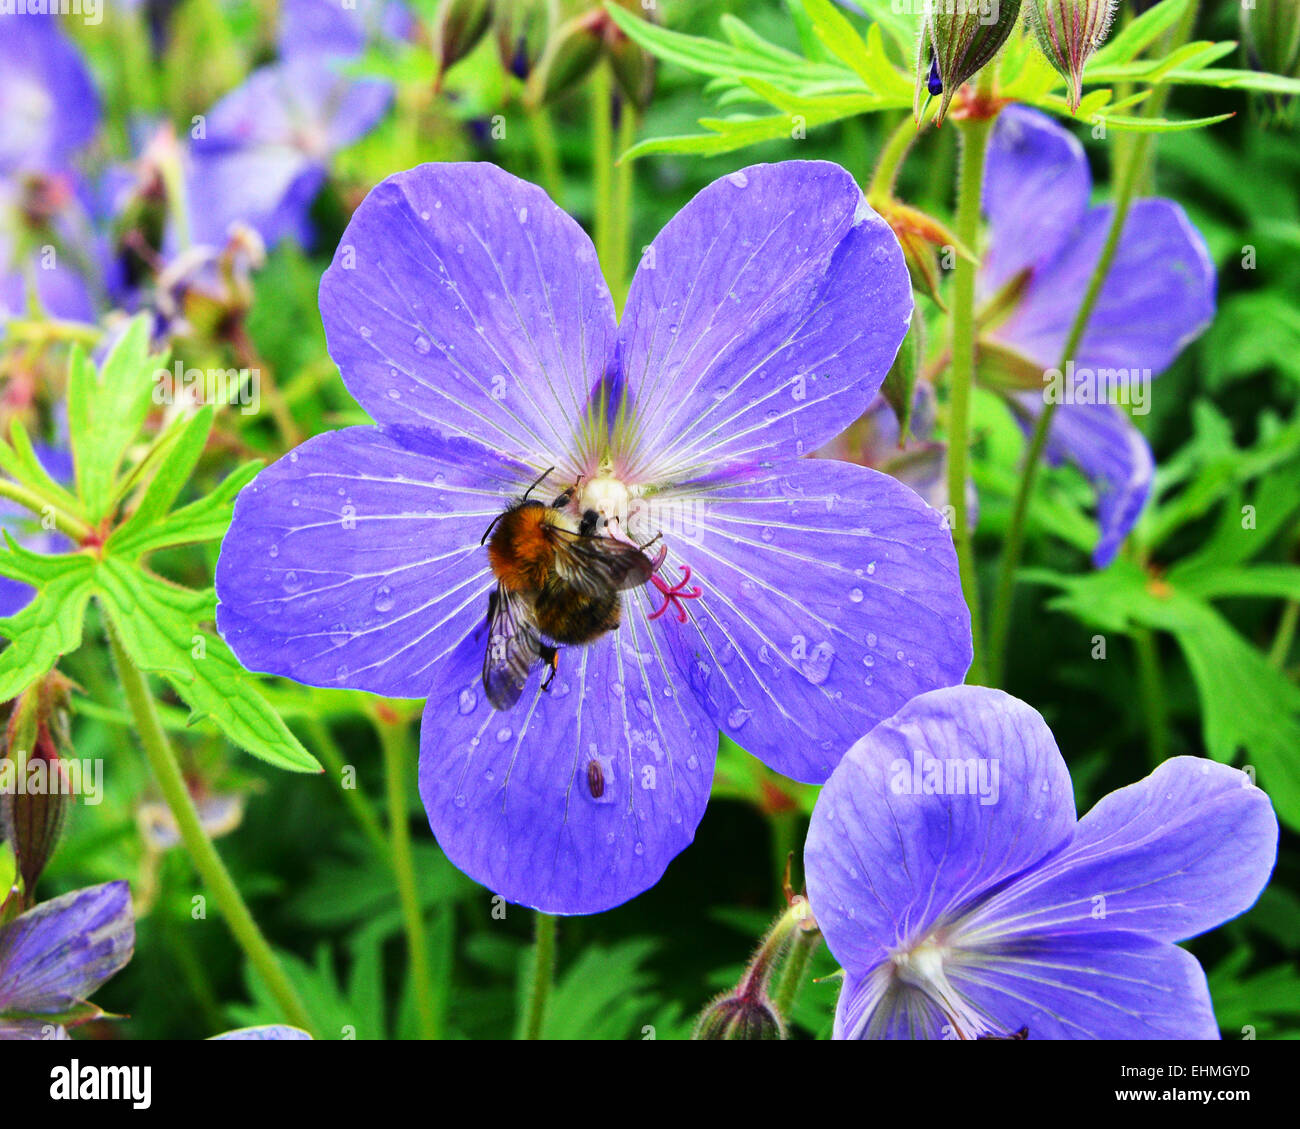 Bee collecting pollen from a Phlox flower, Polemoniaceae, Somerset, Exmoor, England. Stock Photo